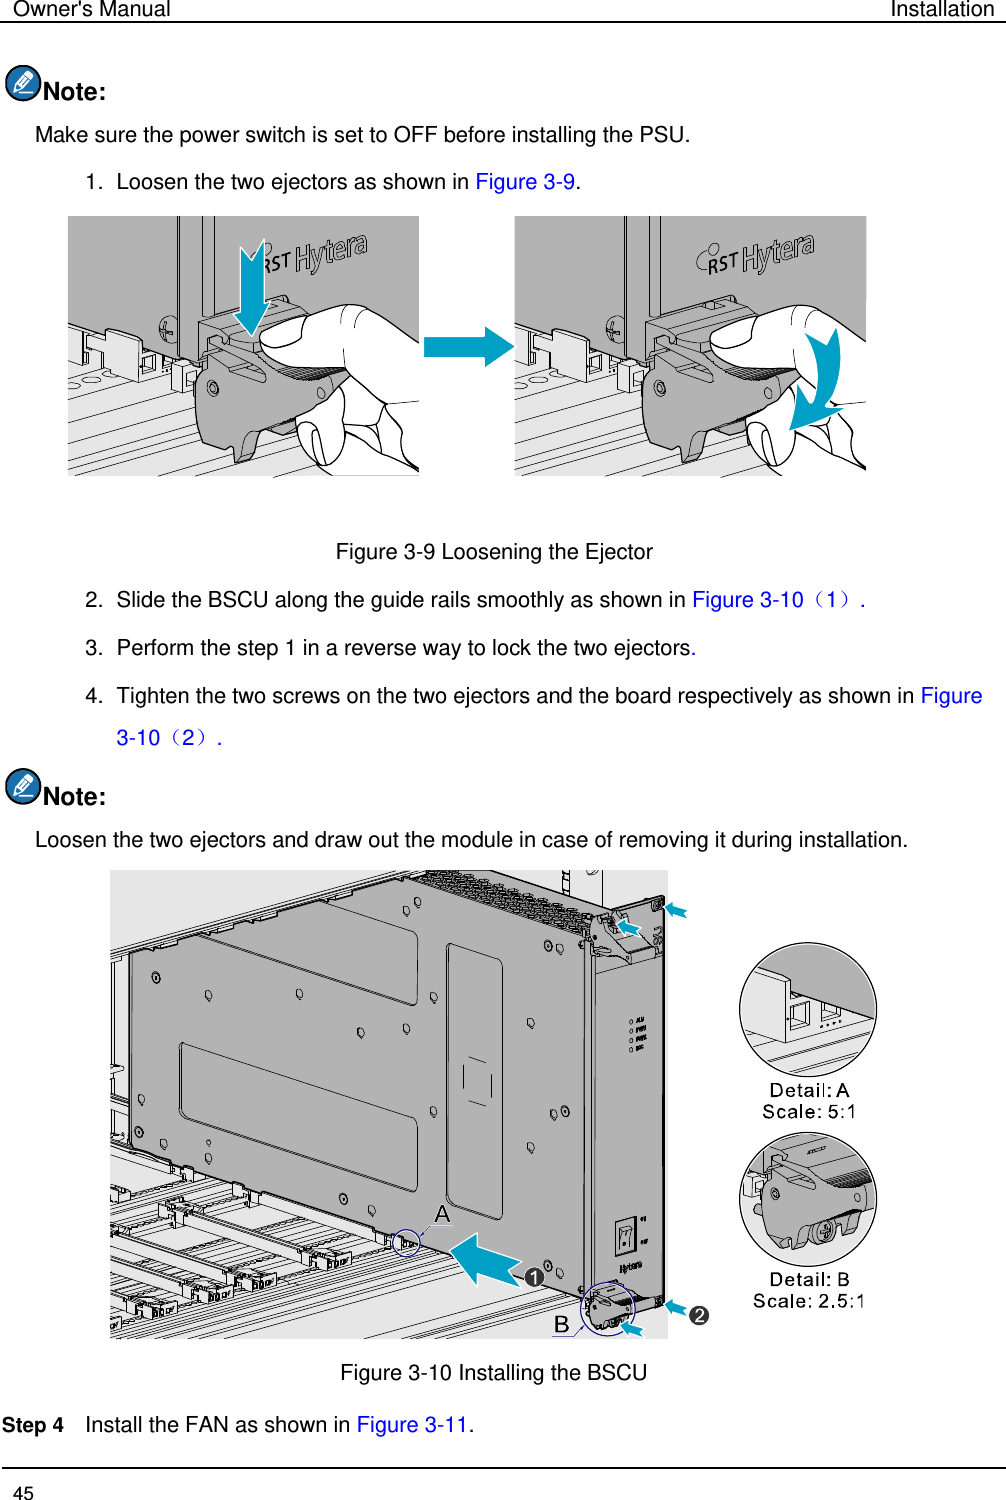 Owner&apos;s Manual Installation  45  Note:   Make sure the power switch is set to OFF before installing the PSU.     1. Loosen the two ejectors as shown in Figure 3-9.  Figure 3-9 Loosening the Ejector 2. Slide the BSCU along the guide rails smoothly as shown in Figure 3-10（1）. 3. Perform the step 1 in a reverse way to lock the two ejectors.   4. Tighten the two screws on the two ejectors and the board respectively as shown in Figure 3-10（2）. Note:   Loosen the two ejectors and draw out the module in case of removing it during installation.    Figure 3-10 Installing the BSCU   Step 4 Install the FAN as shown in Figure 3-11. 